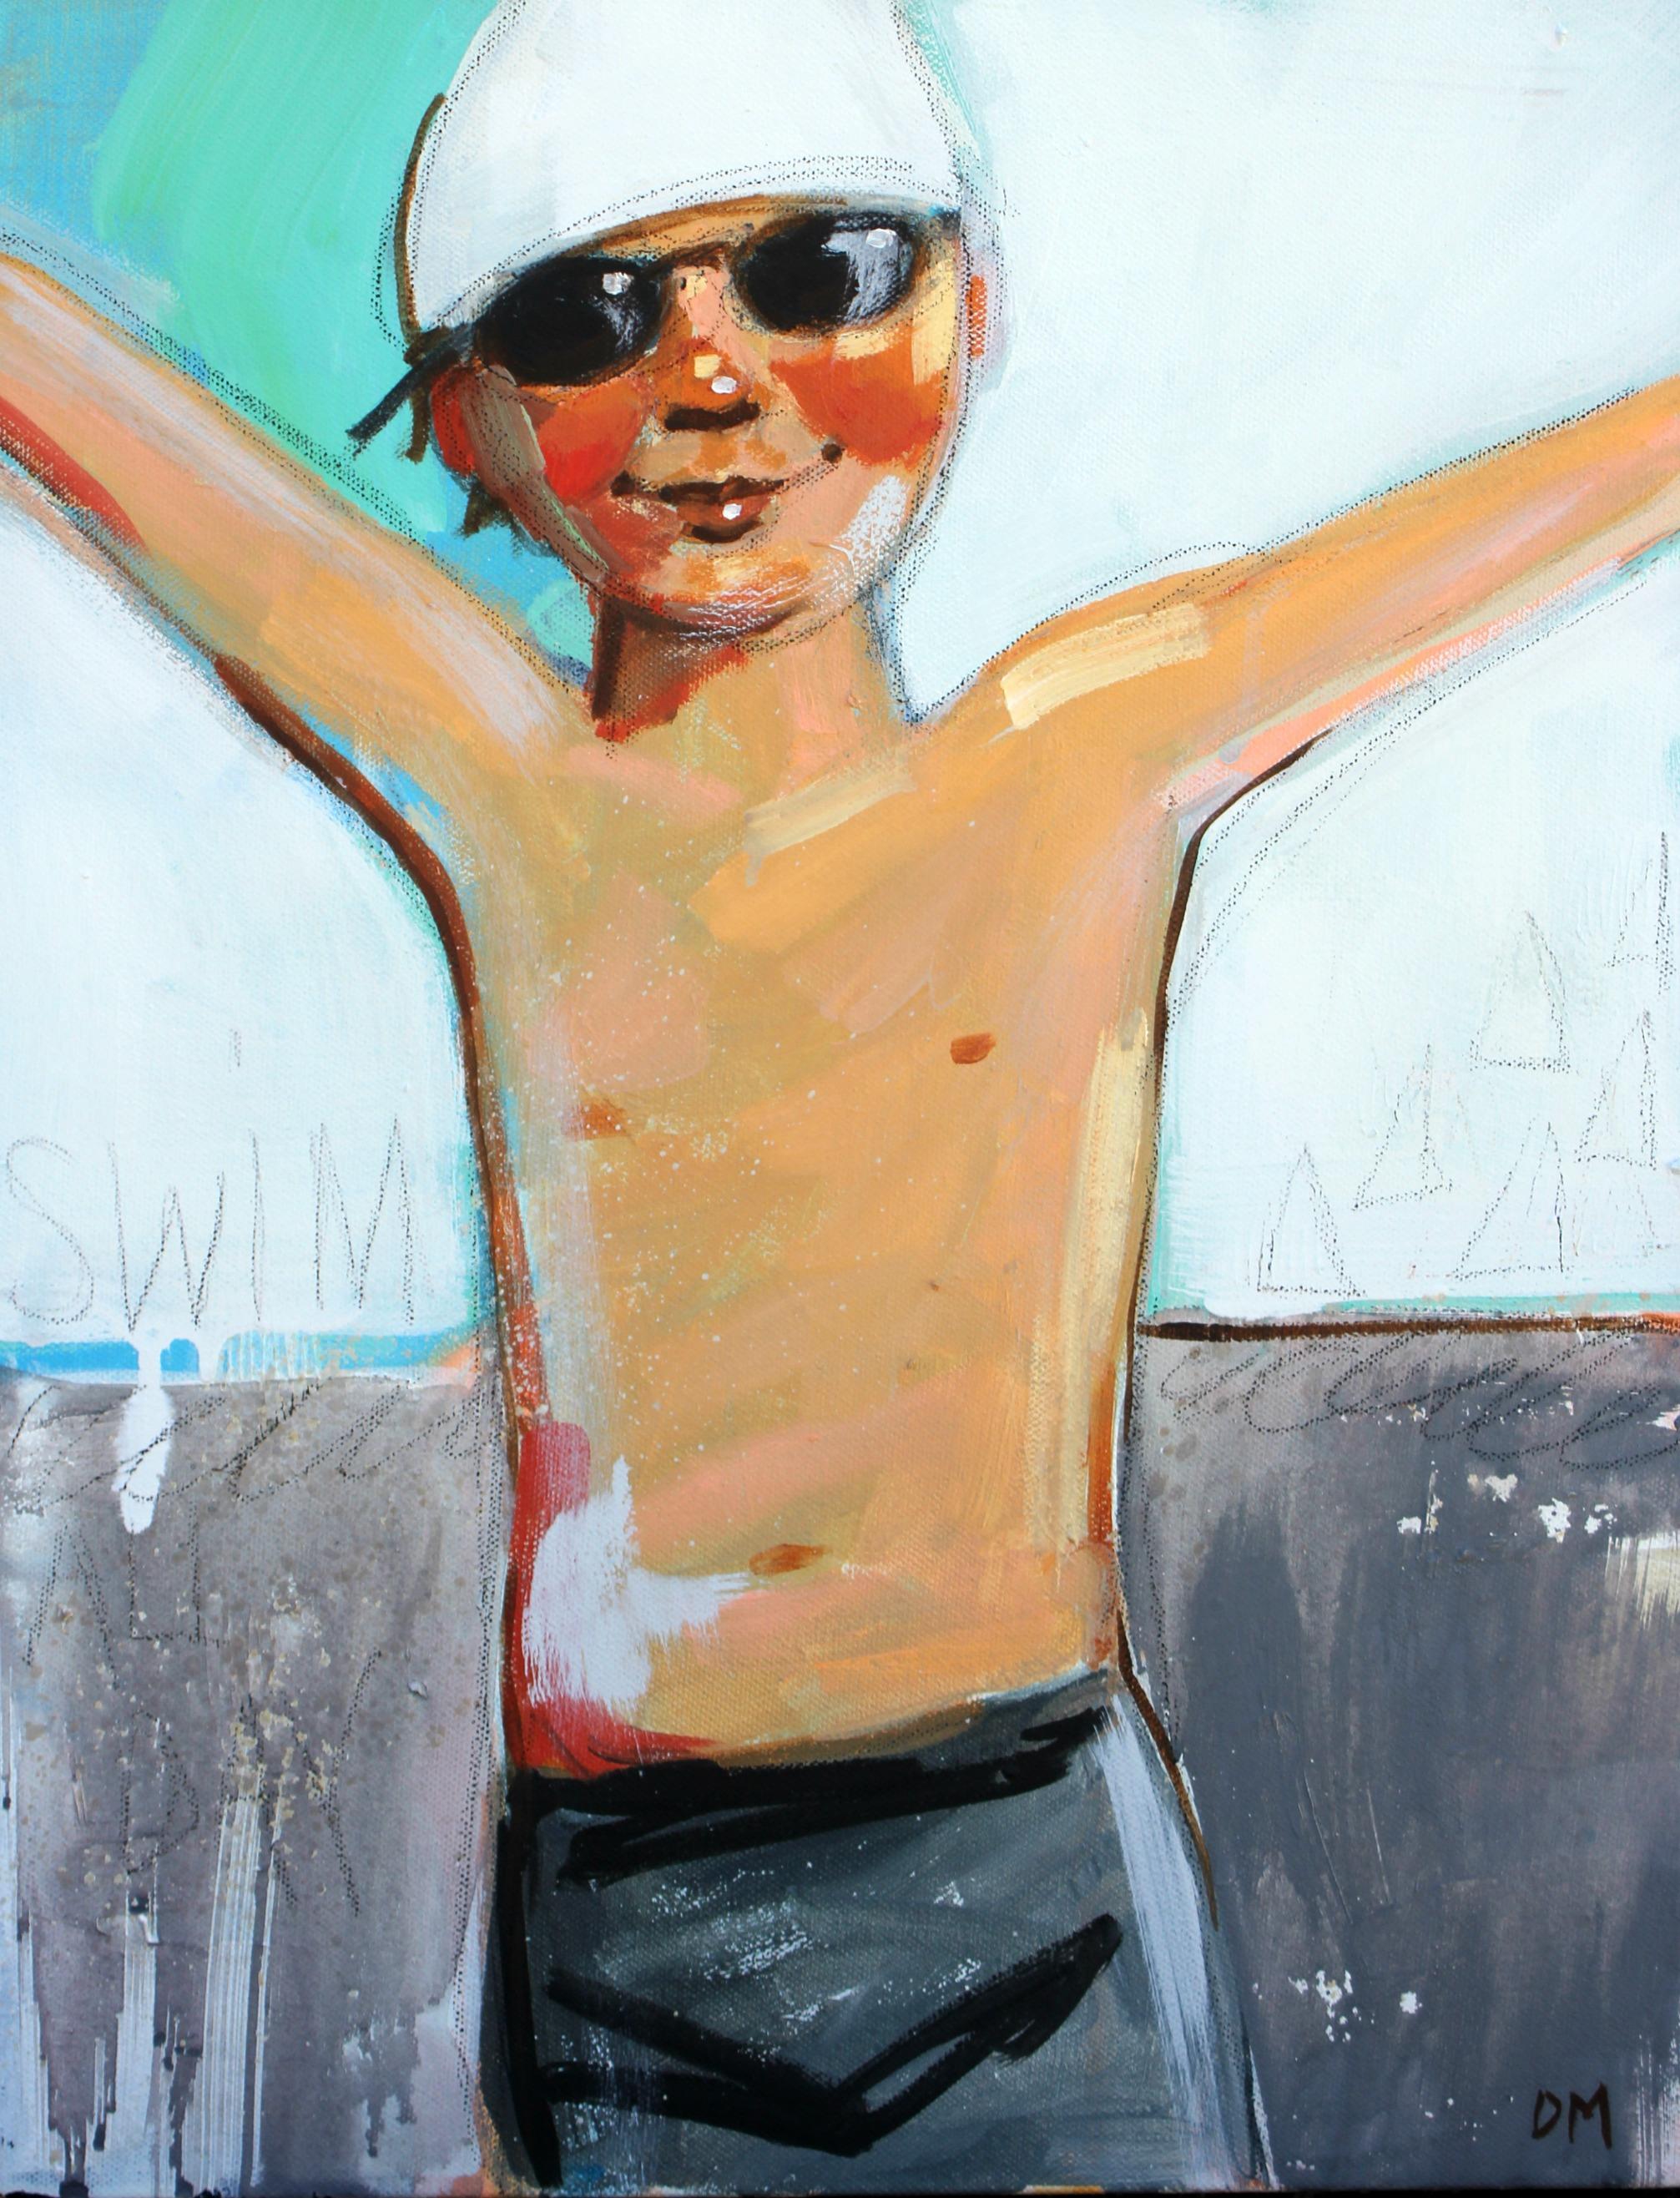 Debbie Miller Figurative Painting - "Swim" oil painting of a boy in black shorts with goggles and white swim cap.